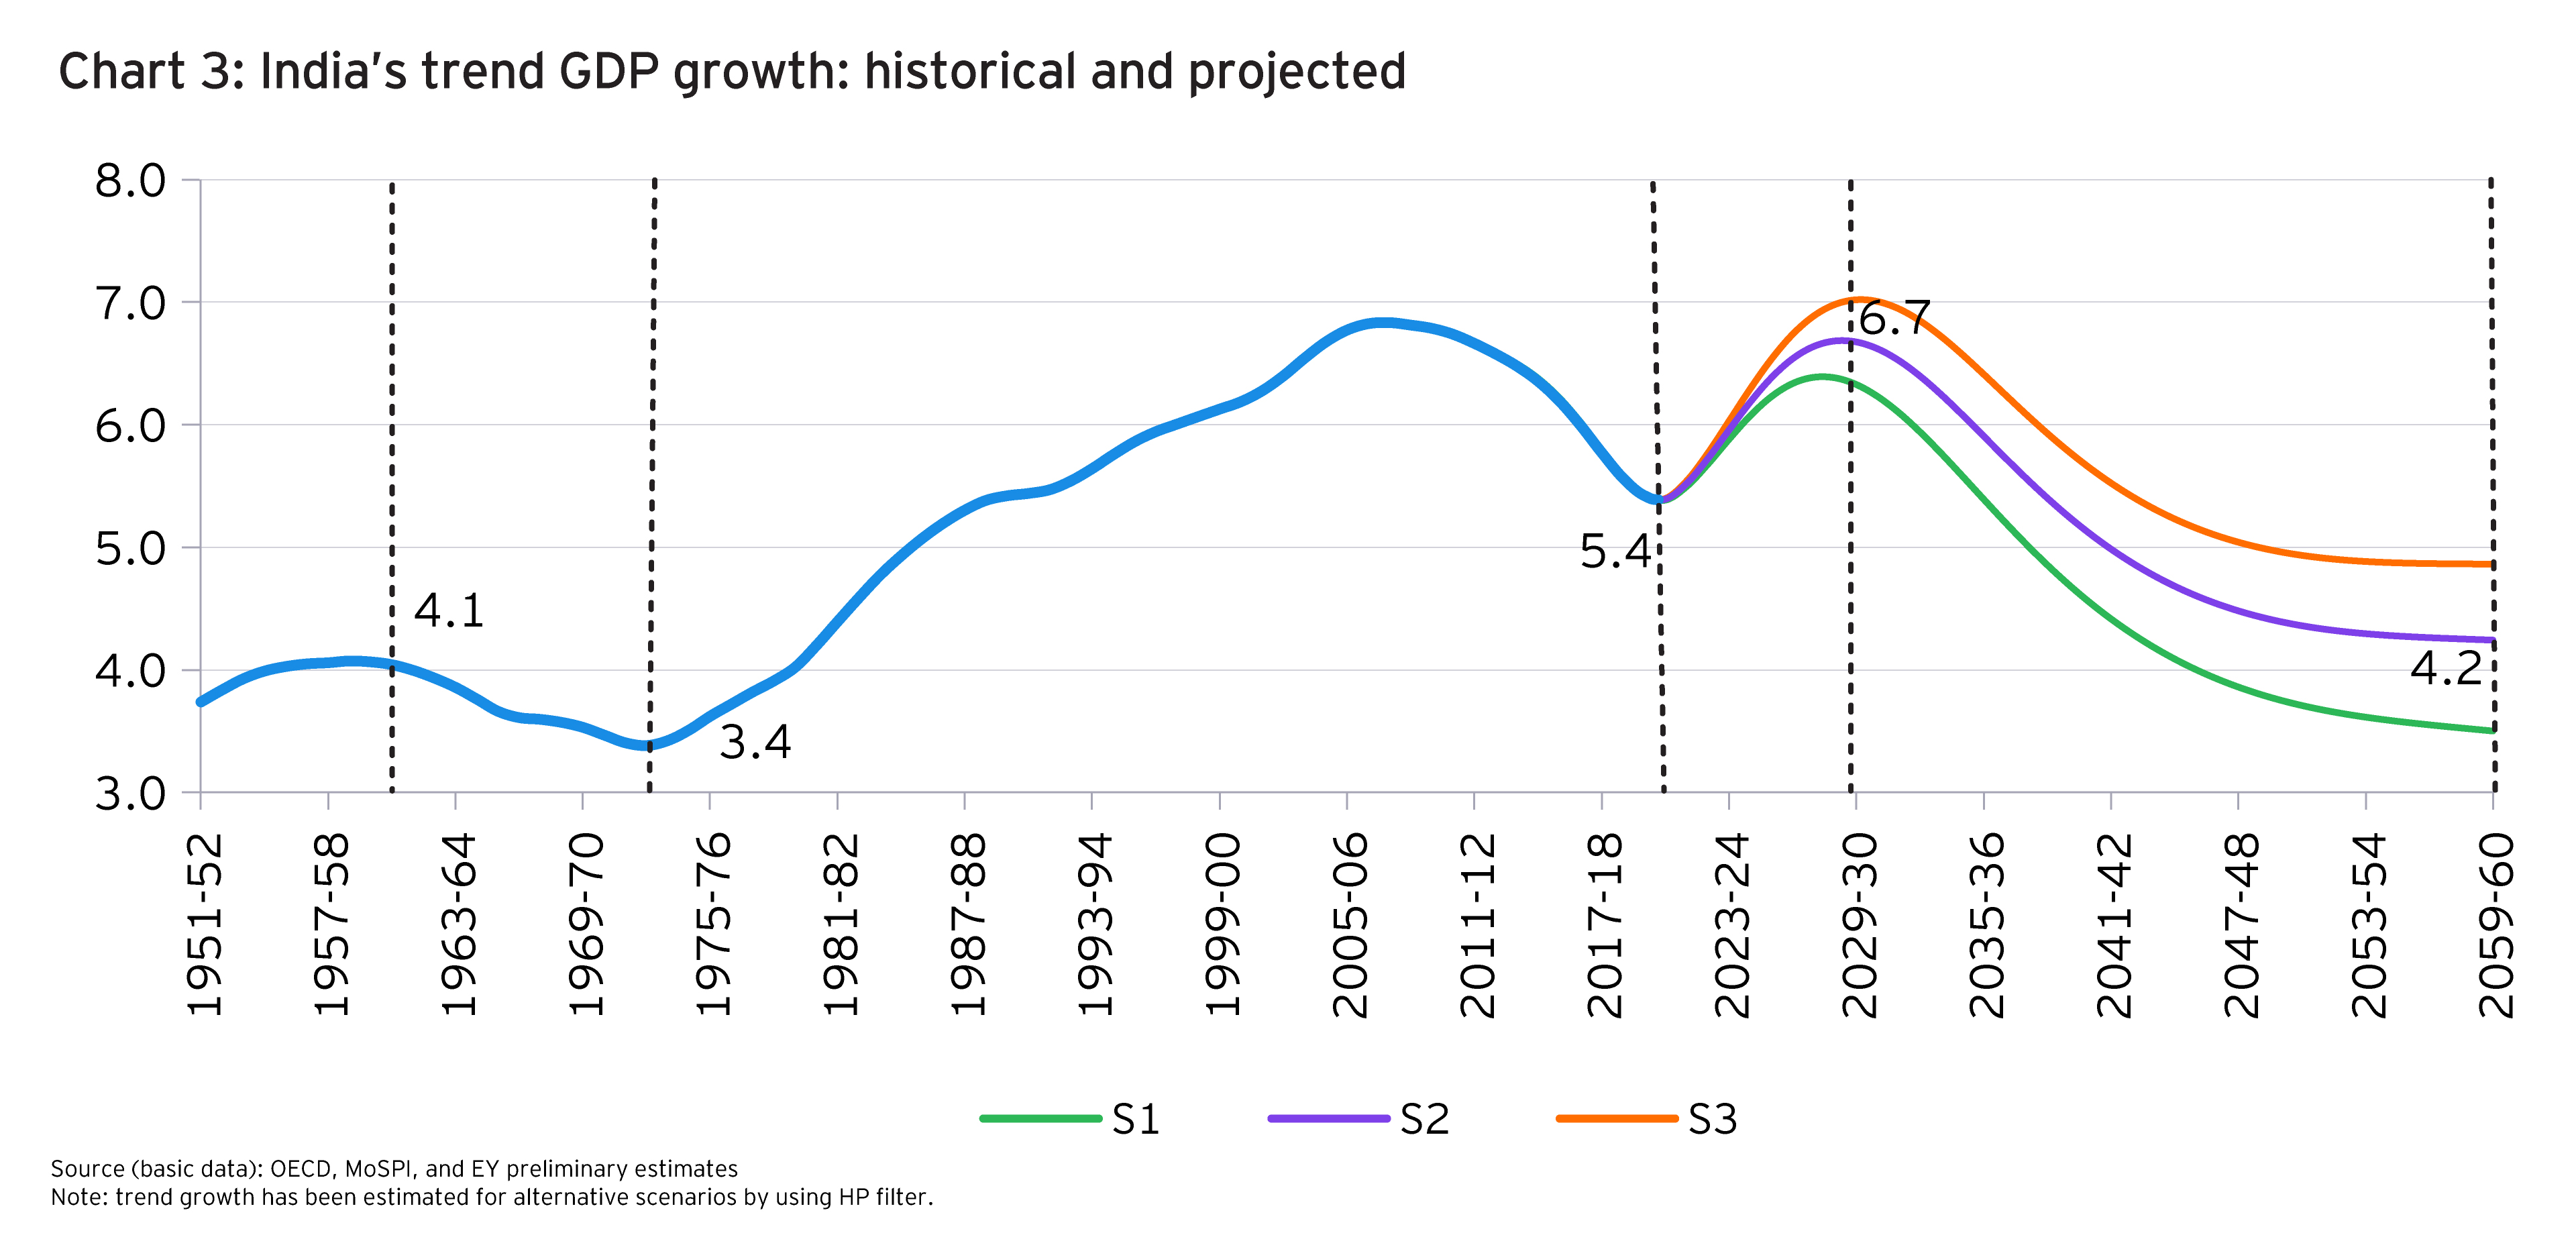 India’s trend GDP growth: historical and projected